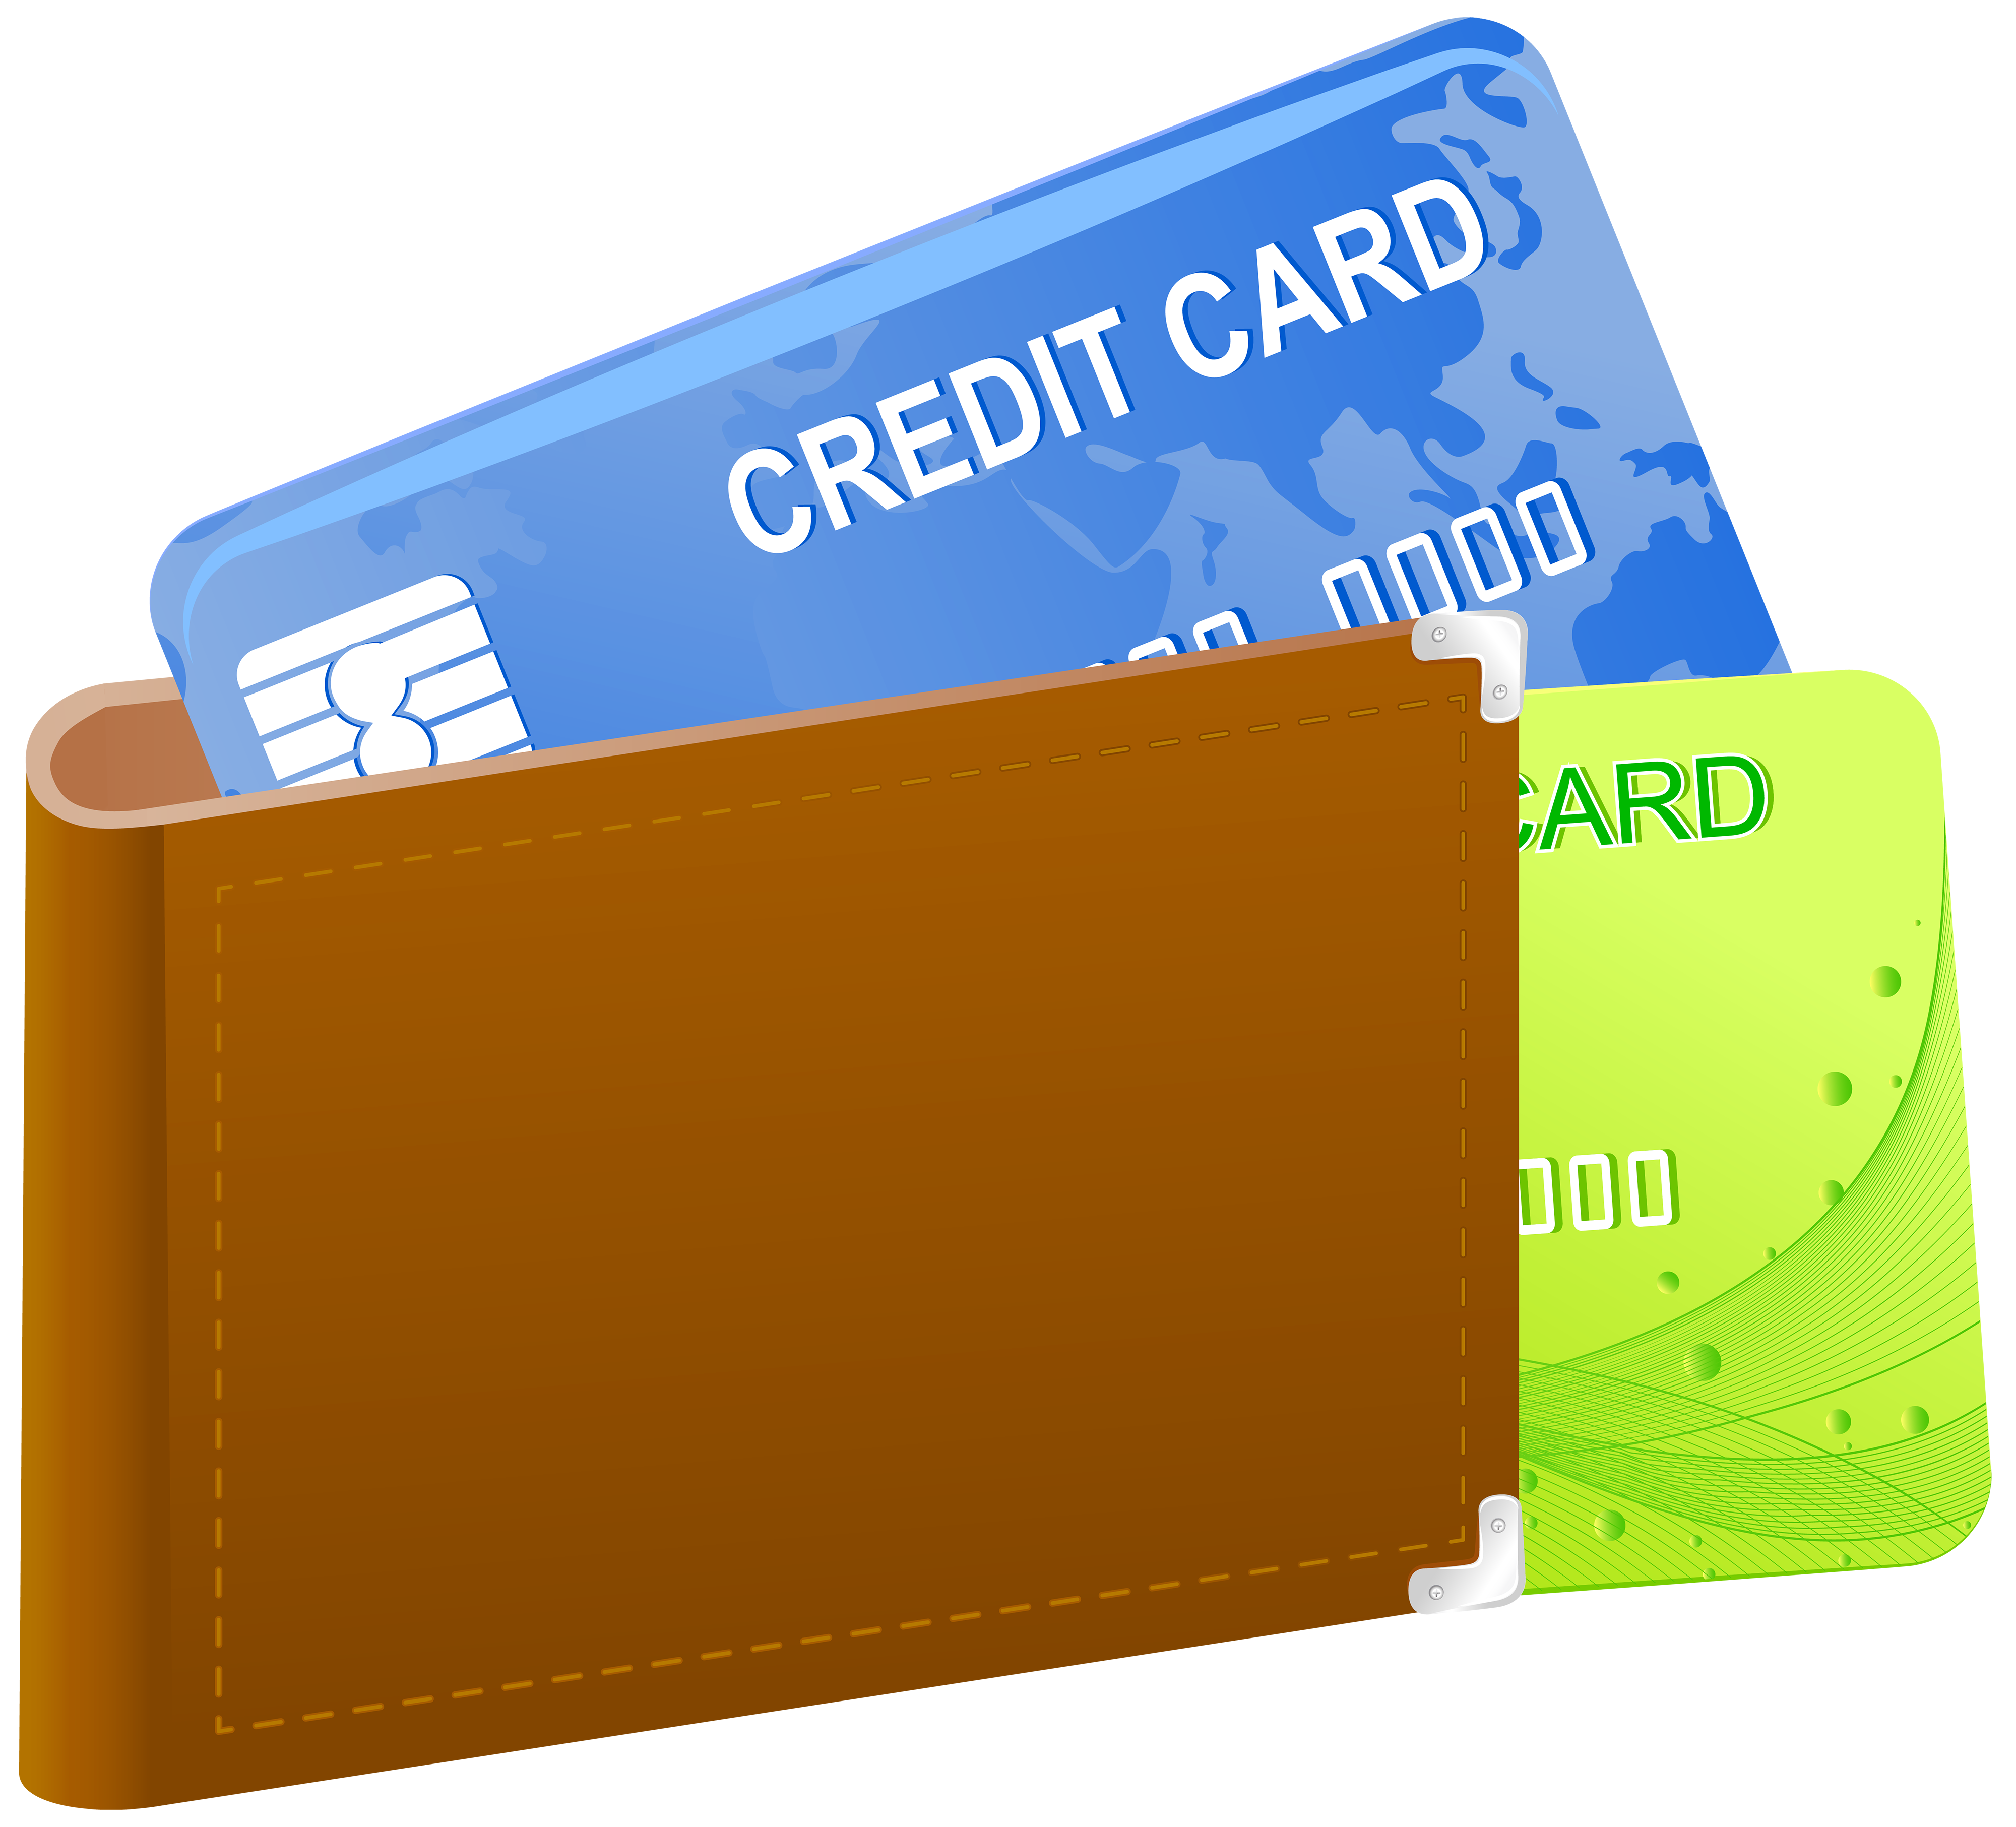 Credit card images png. Wallet with cards clipart